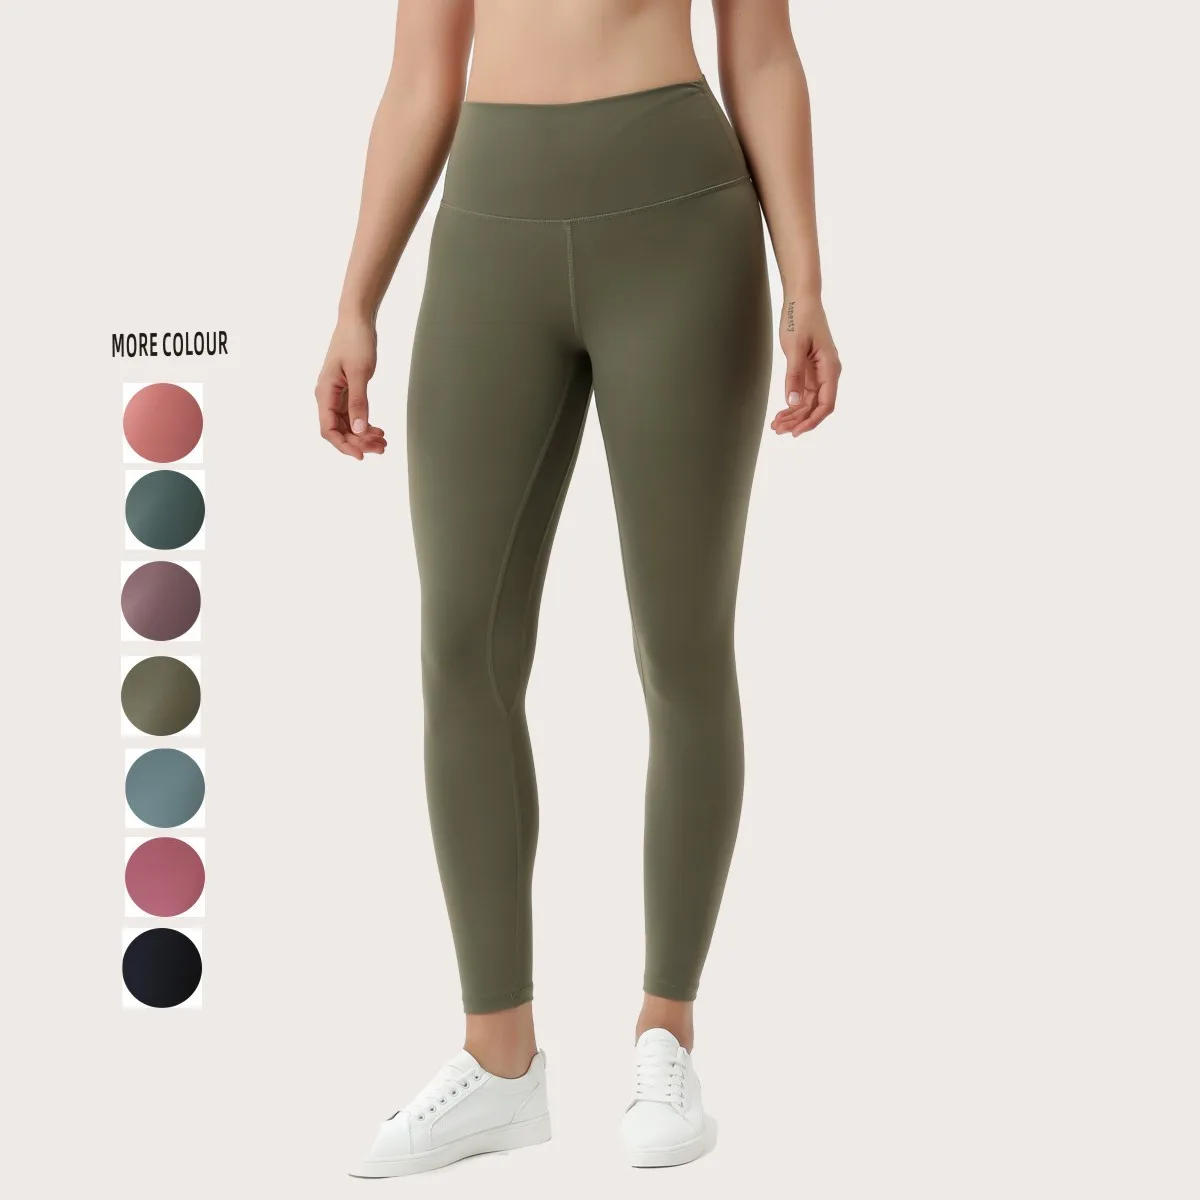 Chinese Sexy Yoga Pants For Women Mesh Leggings With Side Yoga Pants For Sex Yoga Pants